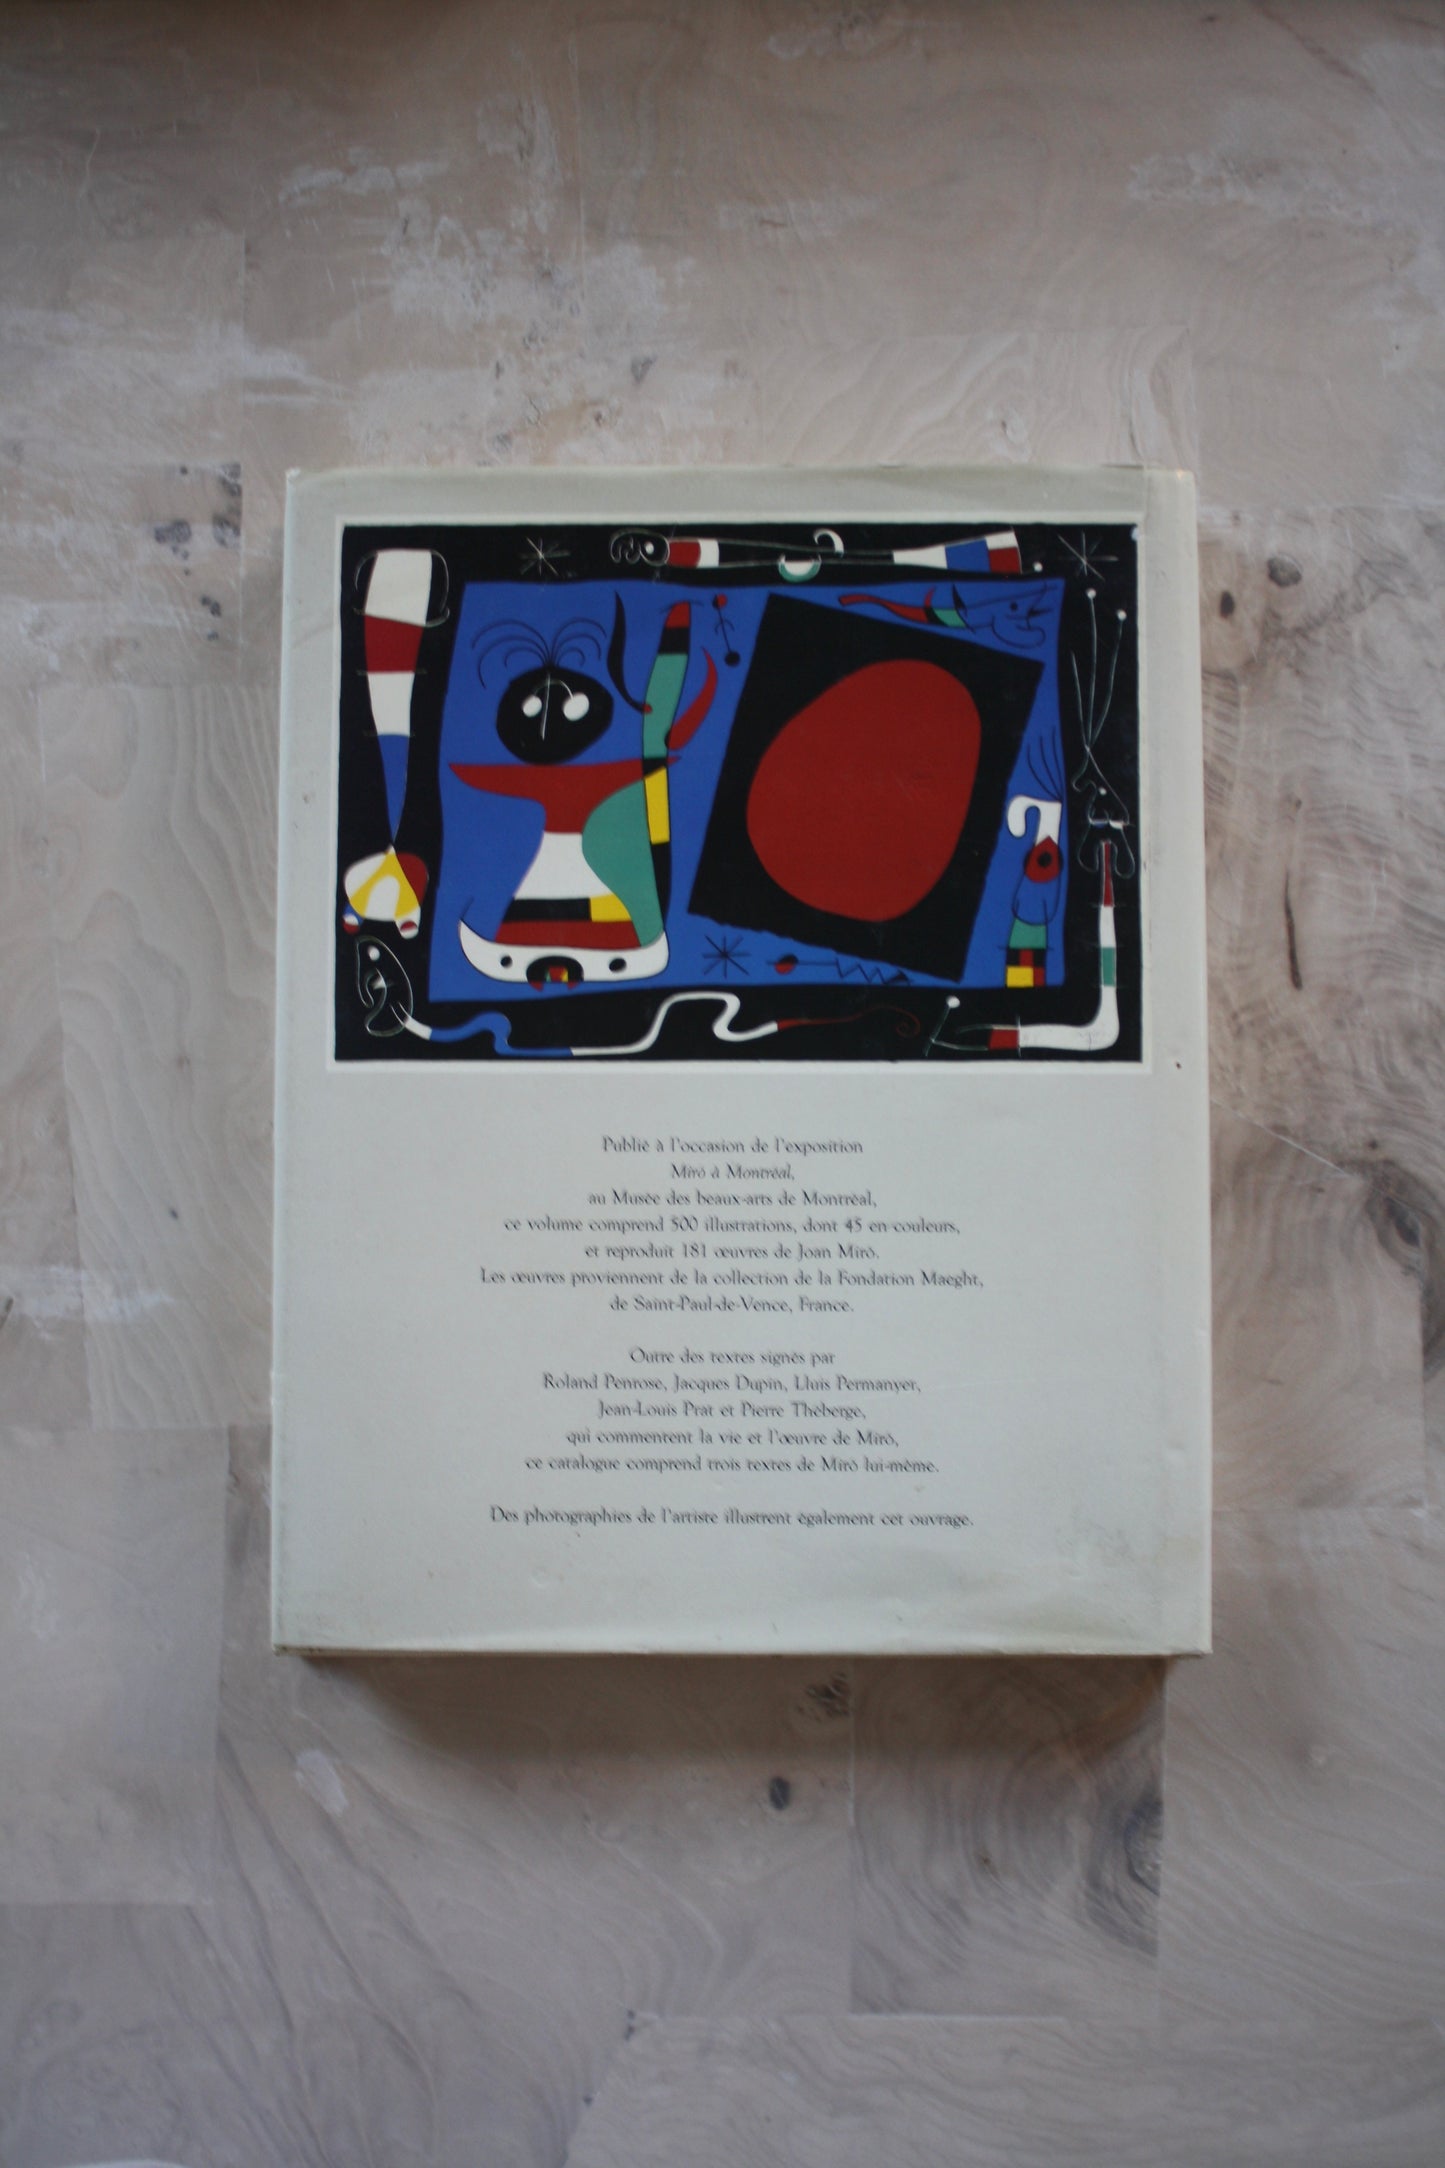 Miró in Montreal edited by the Montreal Museum of Fine Arts in 1986